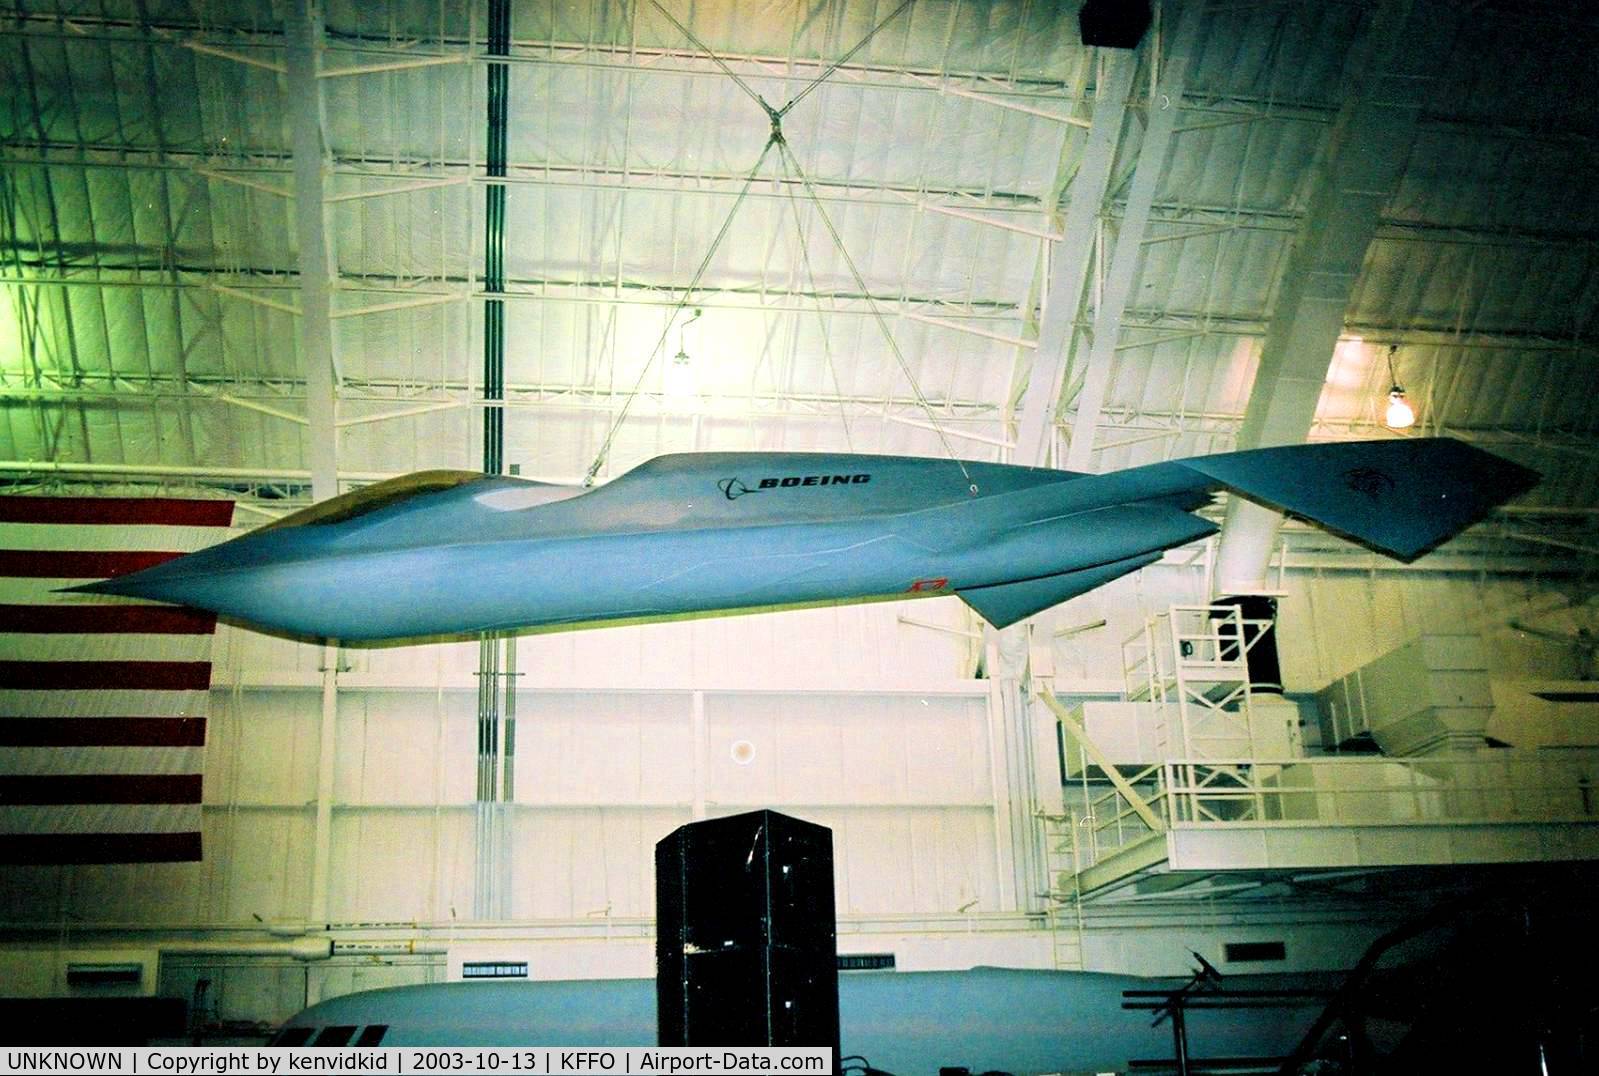 UNKNOWN, Boeing Bird of Prey C/N unknown, At The Museum of the United States Air Force Dayton Ohio.